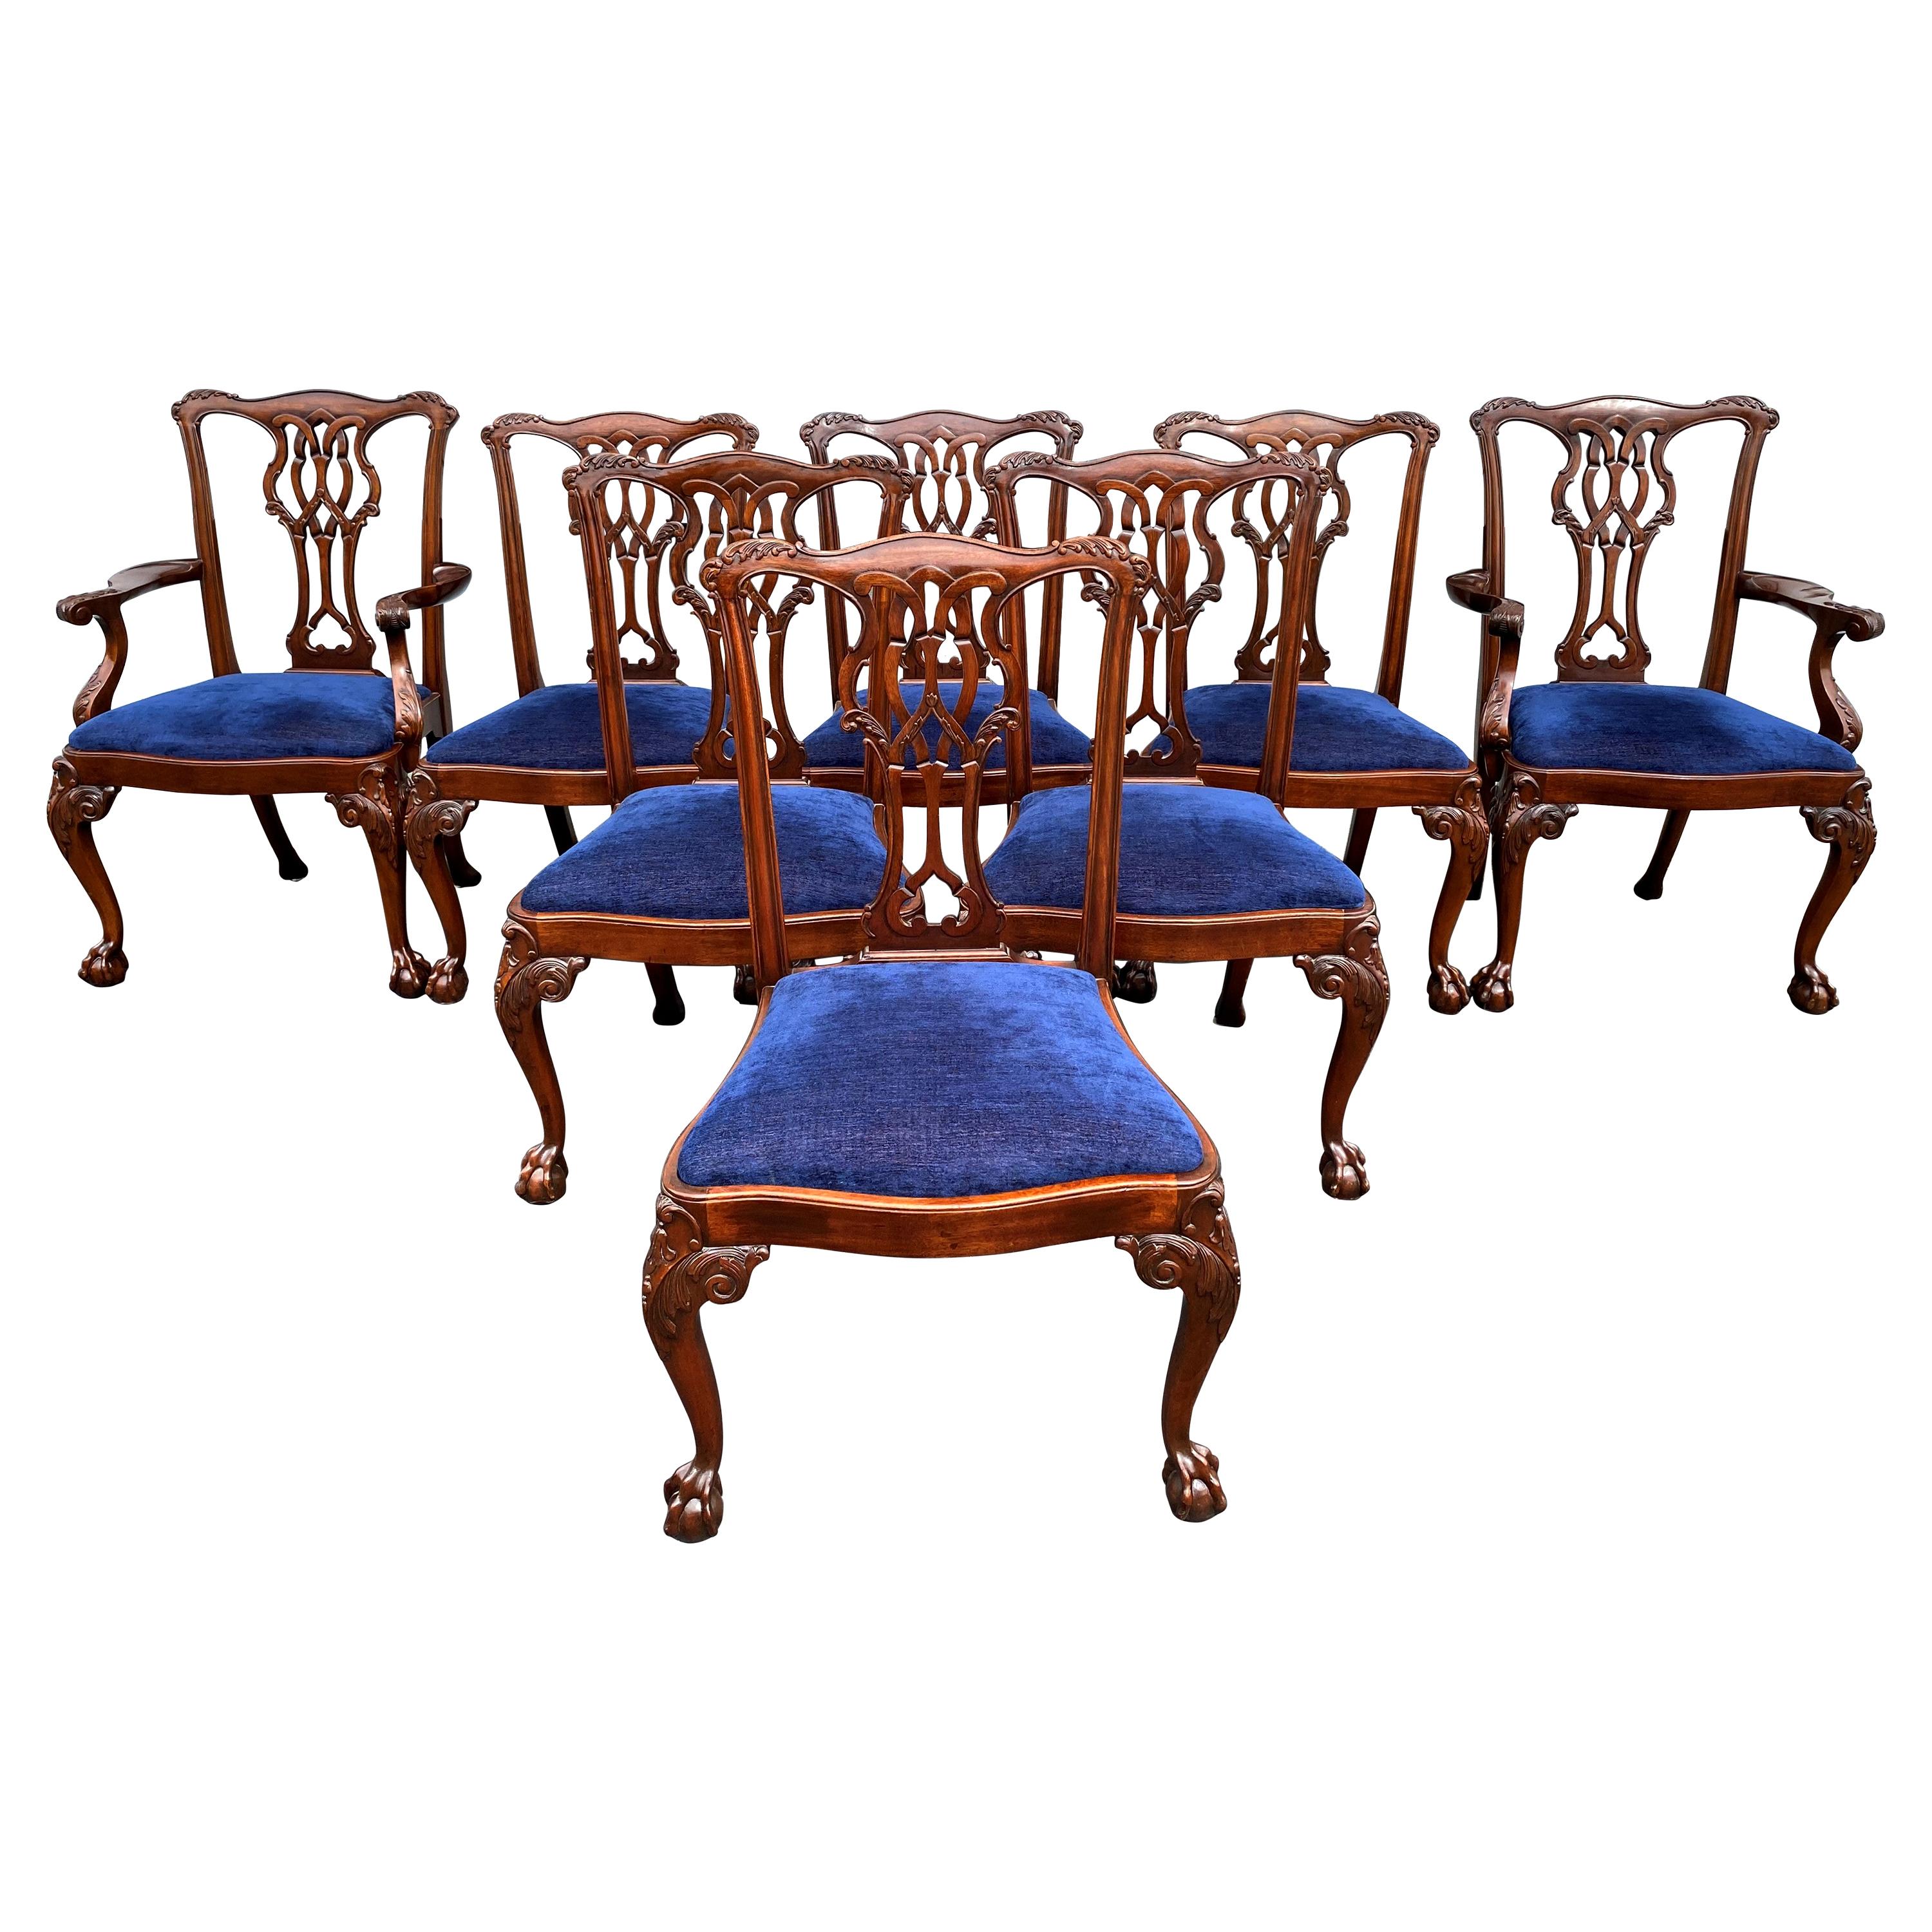 Set of Eight Chippendale Style Mahogany Dining Chairs w/ Blue Upholstered Seats